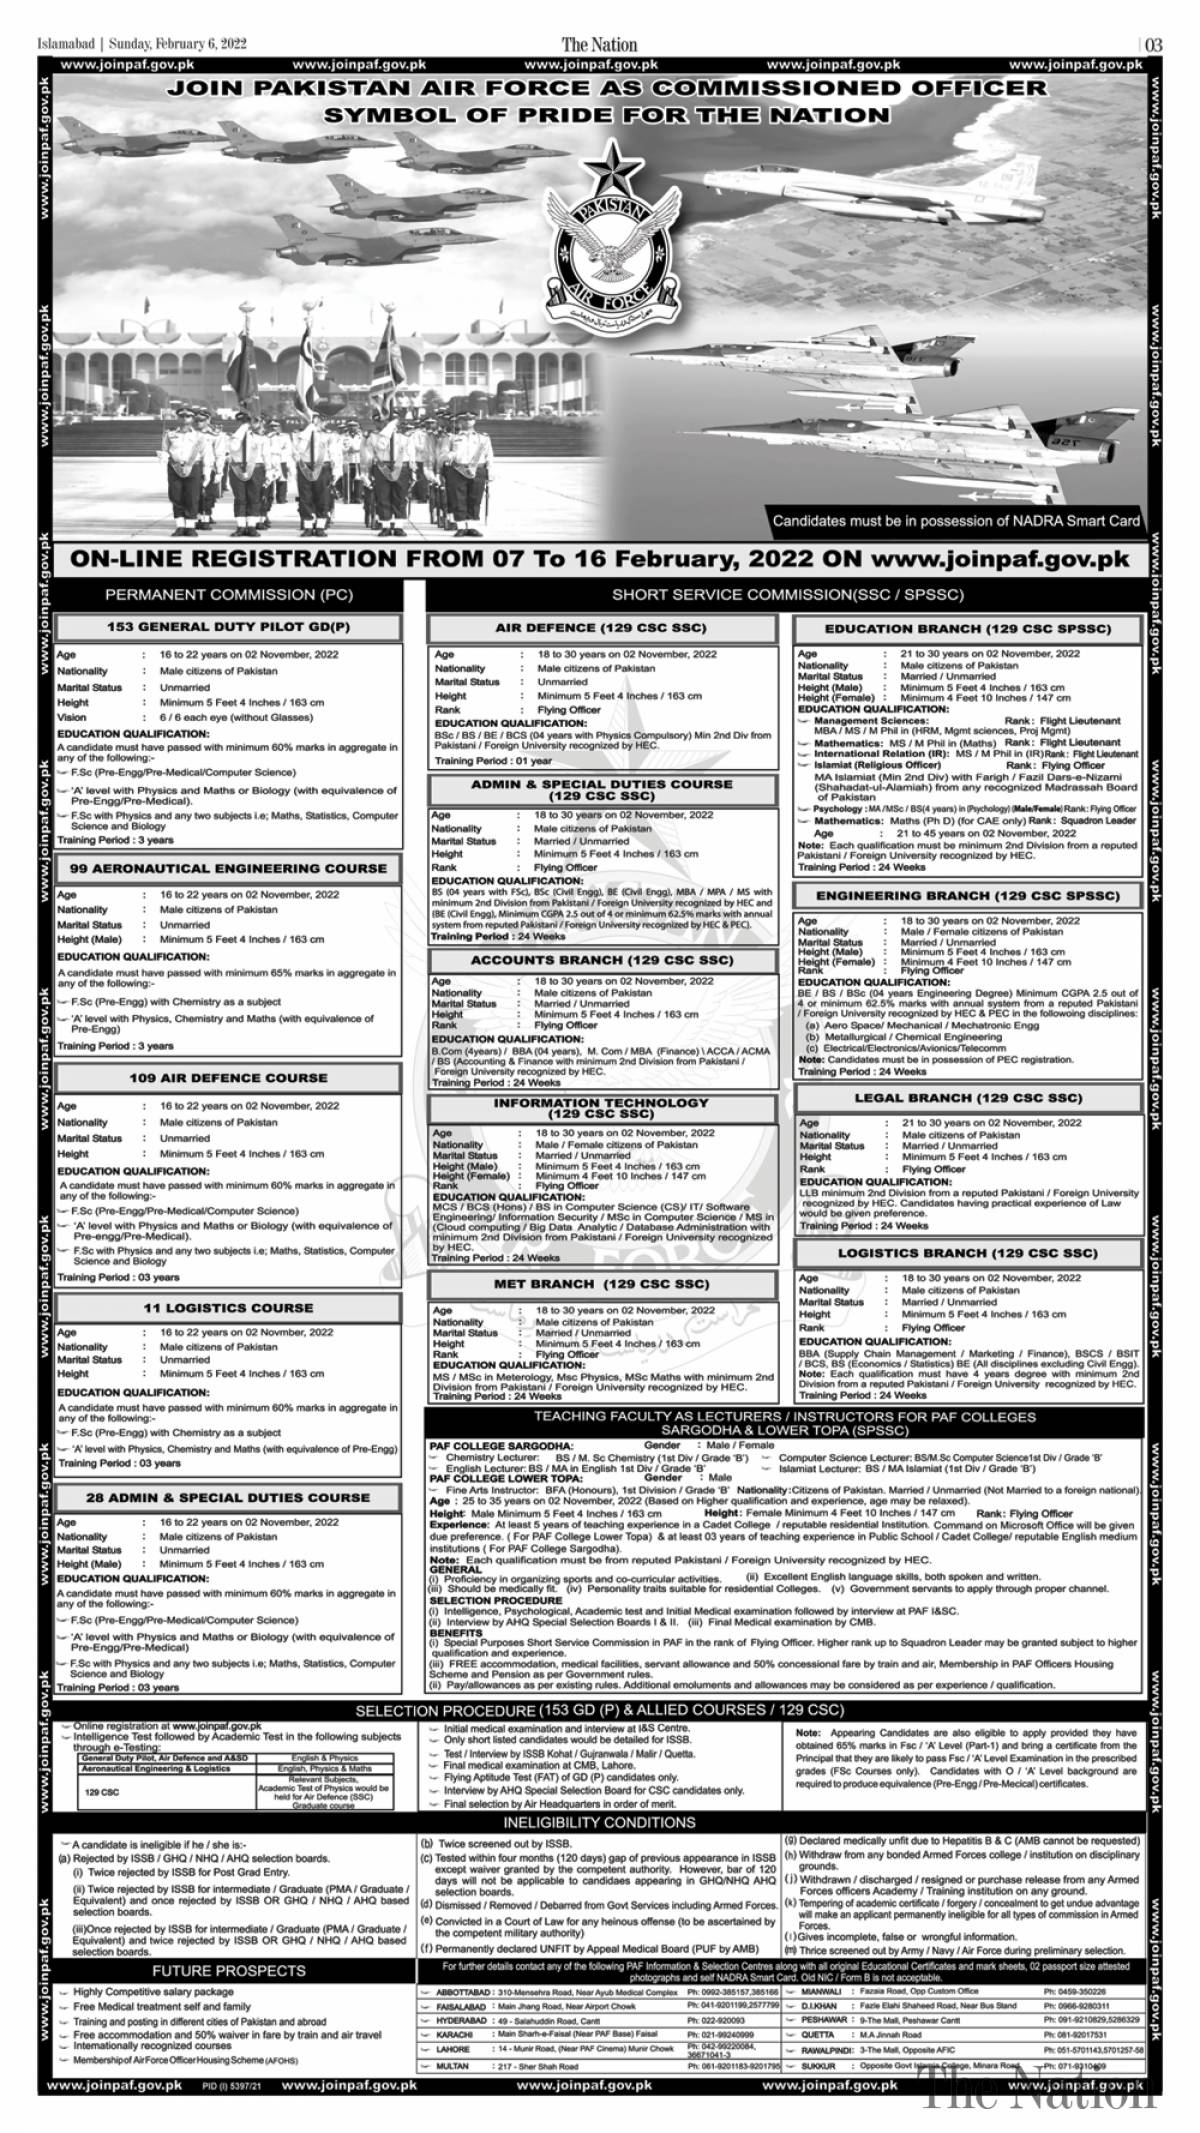 PAF Jobs 2022 for MS MPhil MBA MA MSc BS in Education Branch apply online joinpaf.gov.pk